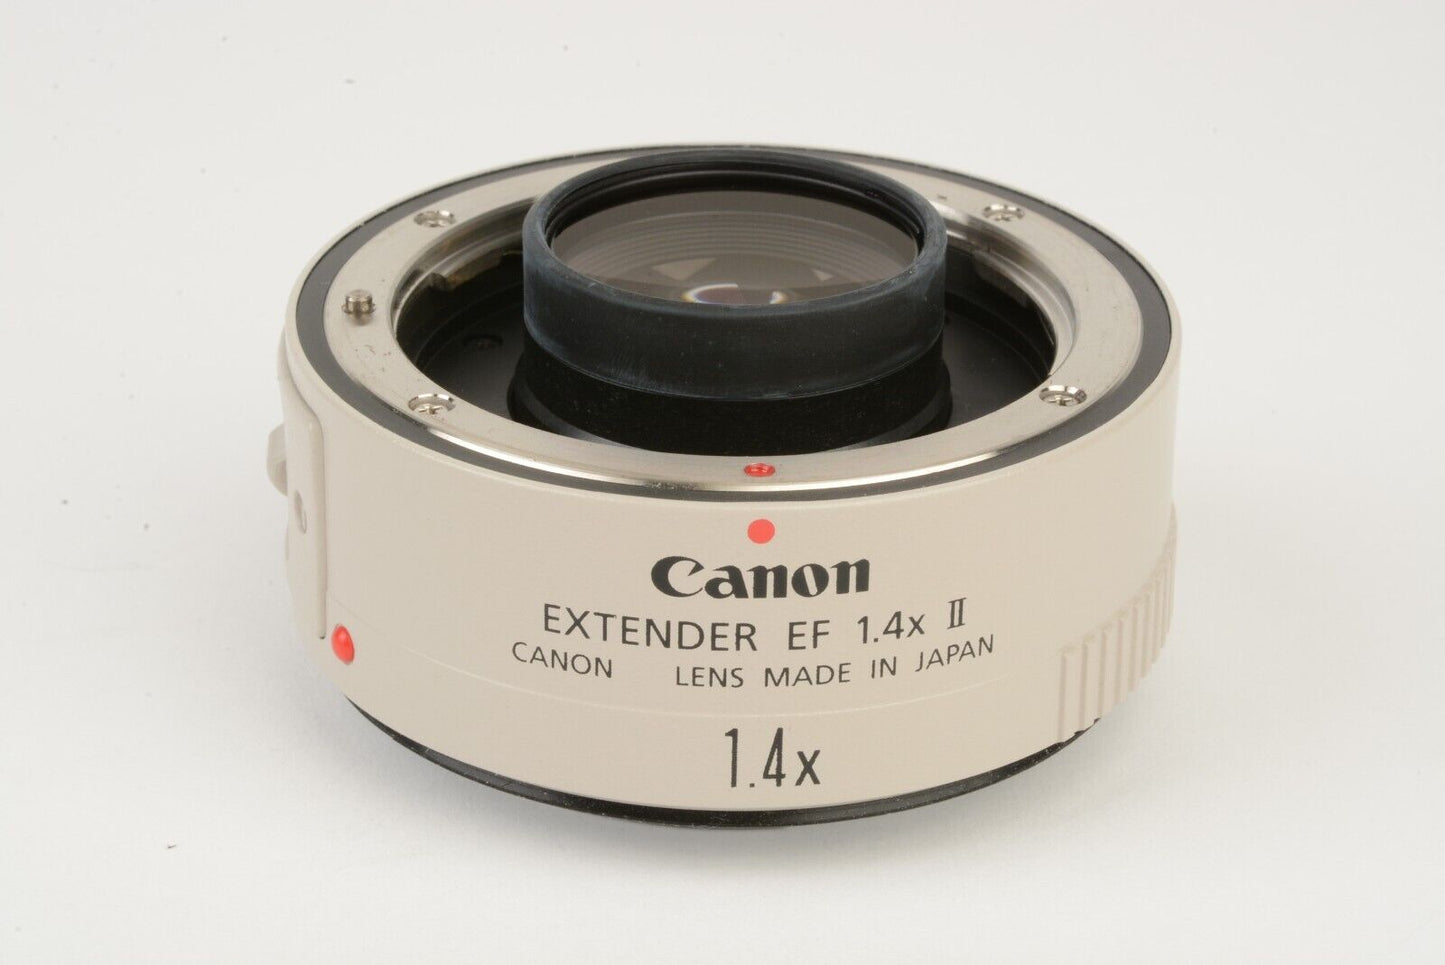 MINT CANON EF 1.4X II EXTENDER TELECONVERTER CAPS, VERY CLEAN BARELY USED